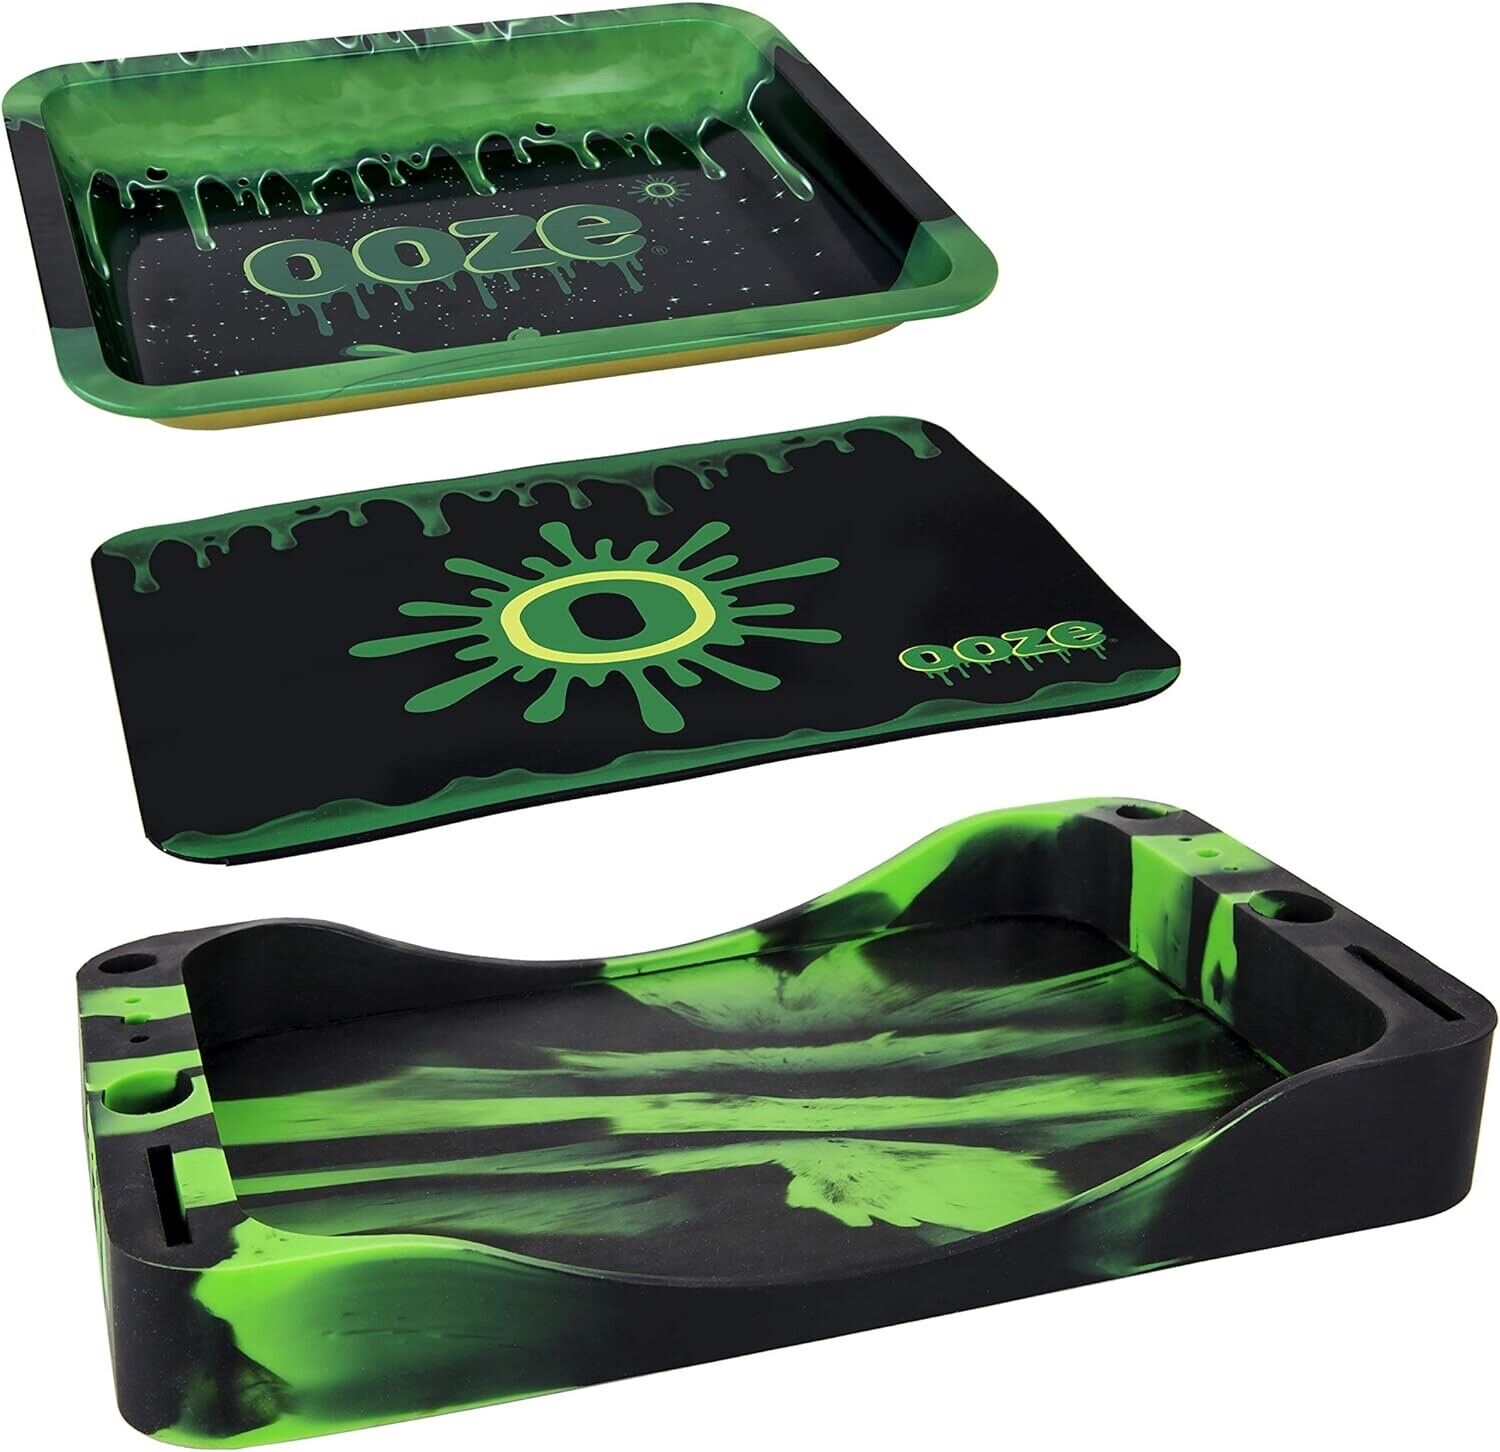 Ooze 3-in-1 Logo Rolling Tray Kit - Rolling and Storing Made Easy